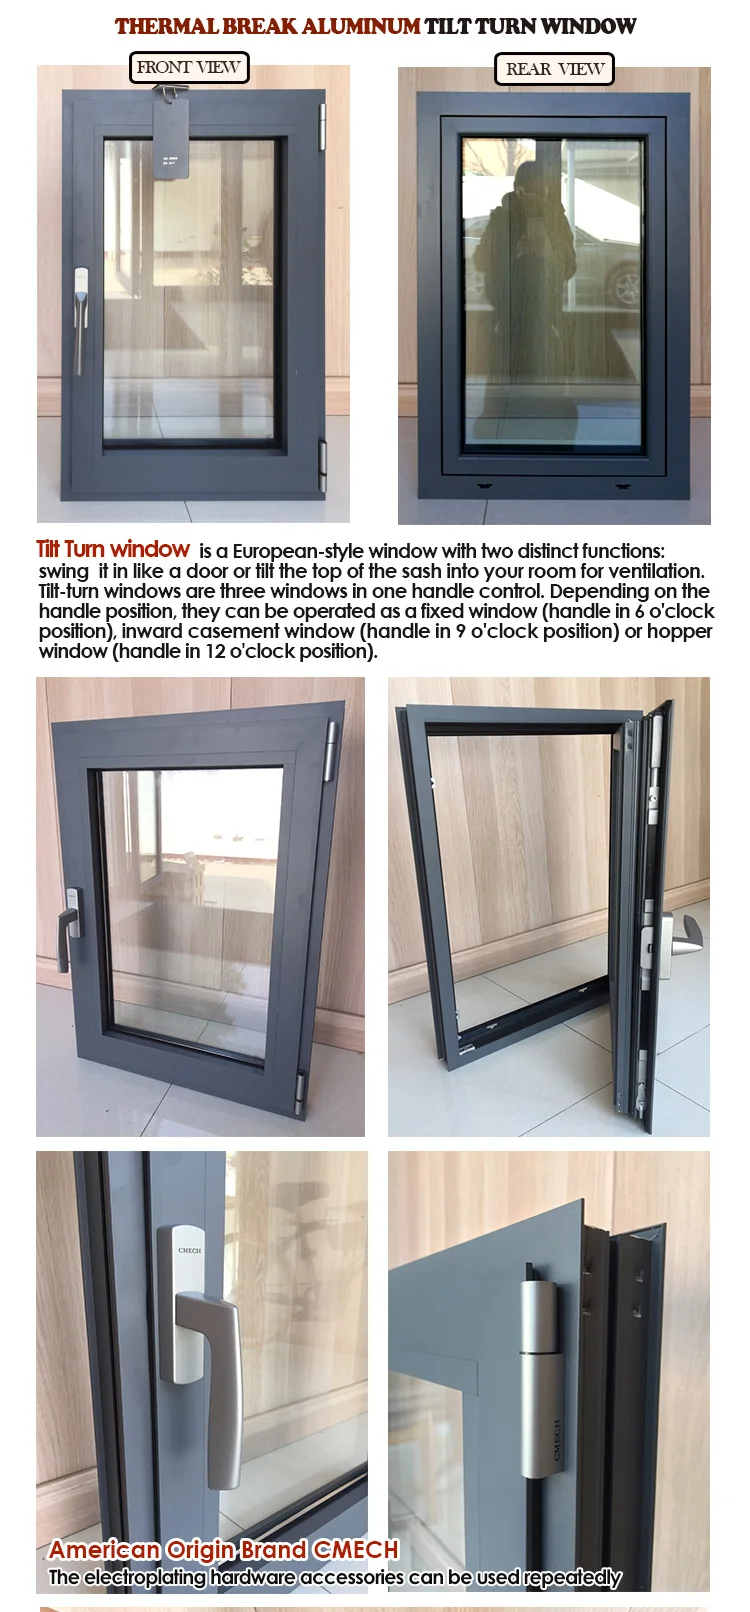 2020 Selling the best quality cost-effective products tempered double glass windows